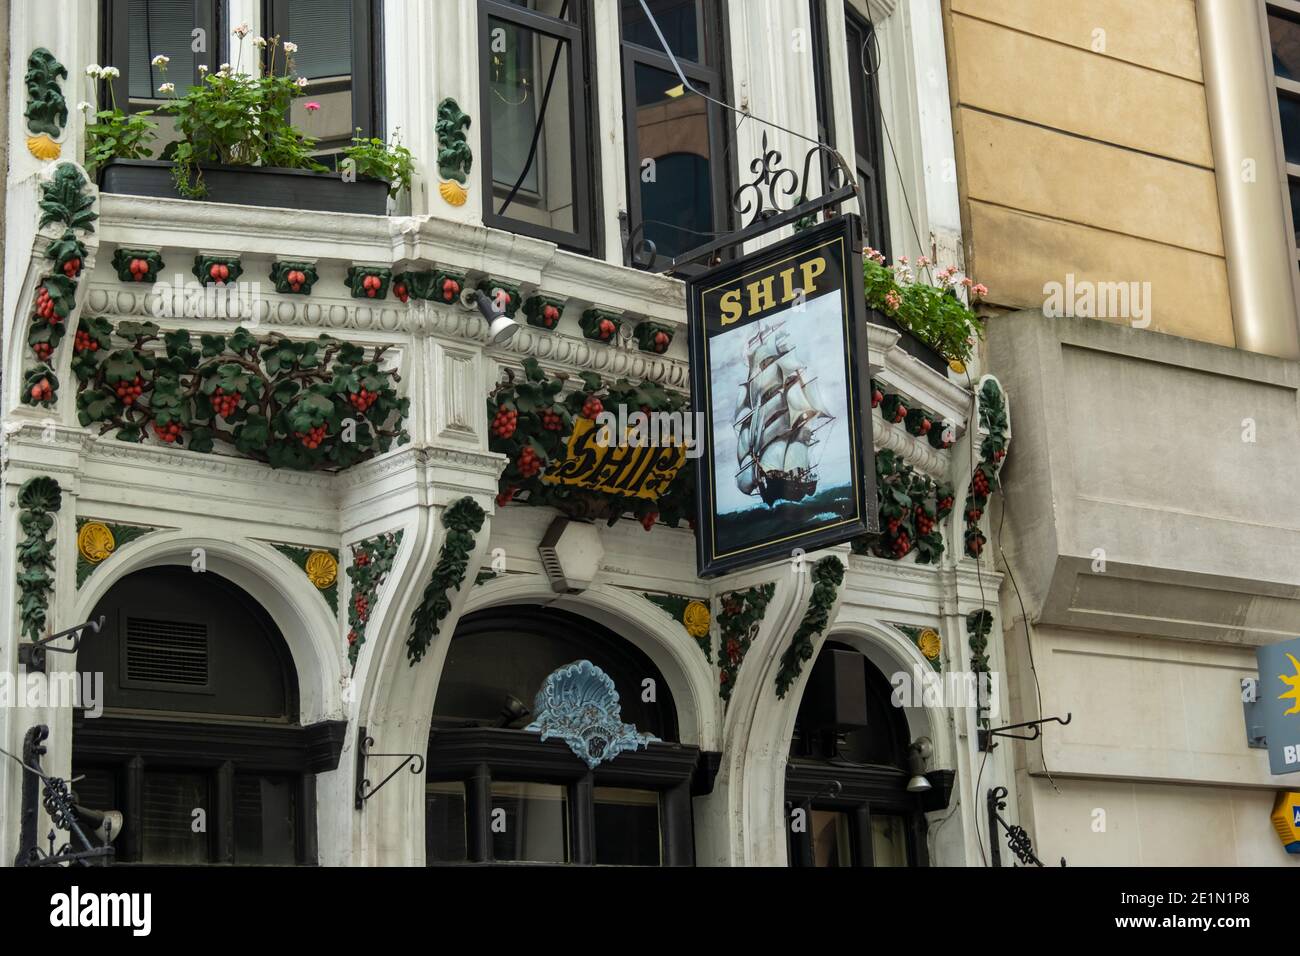 London- January, 2021: The Ship, an independent 19th-century public house on Hart Street in central London Stock Photo